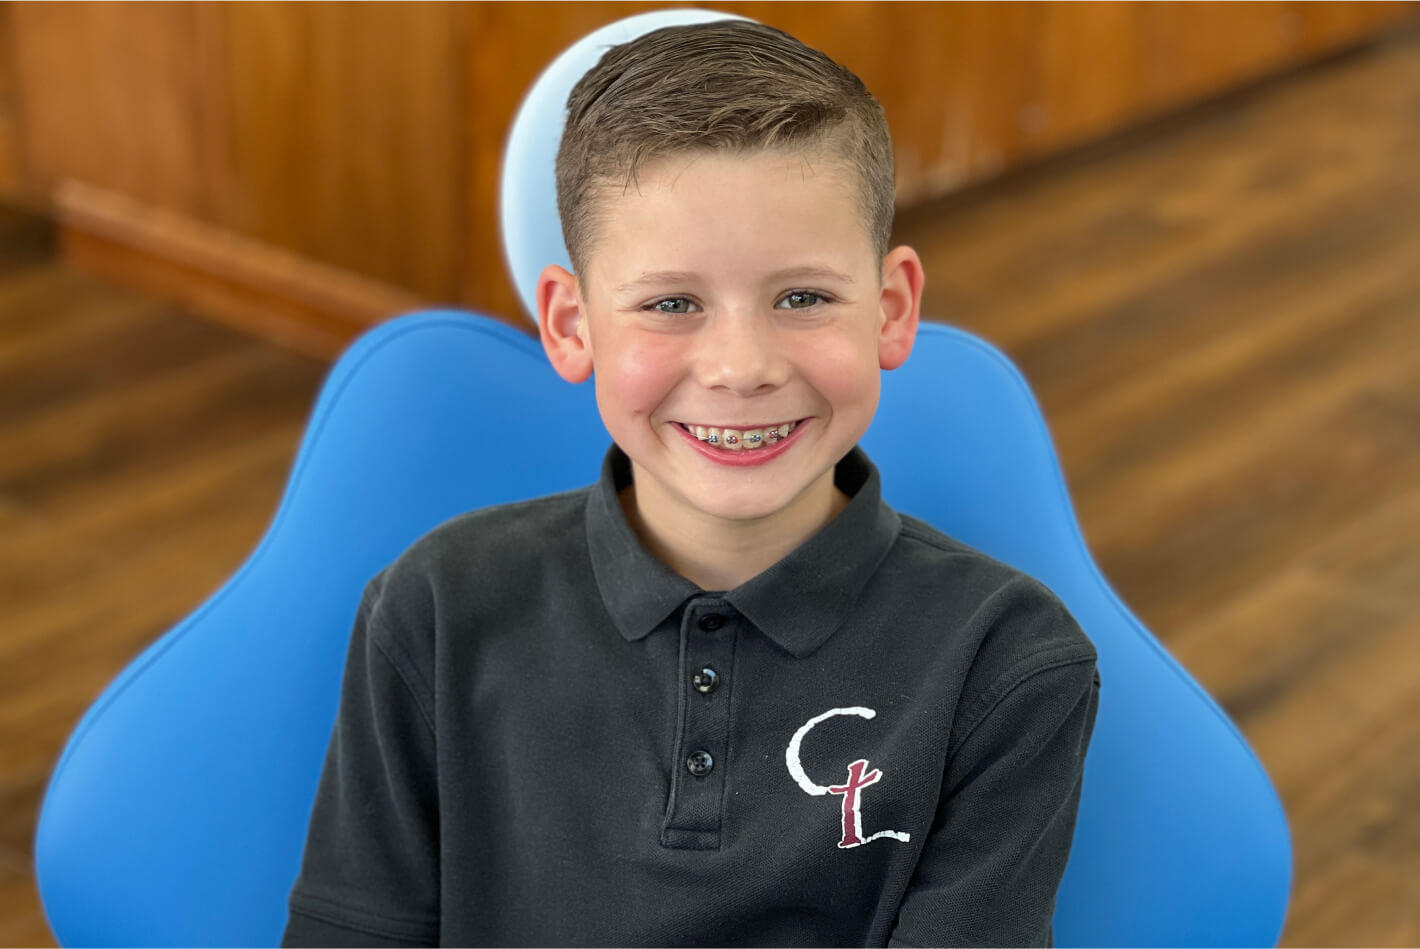 Young boy smiling with braces